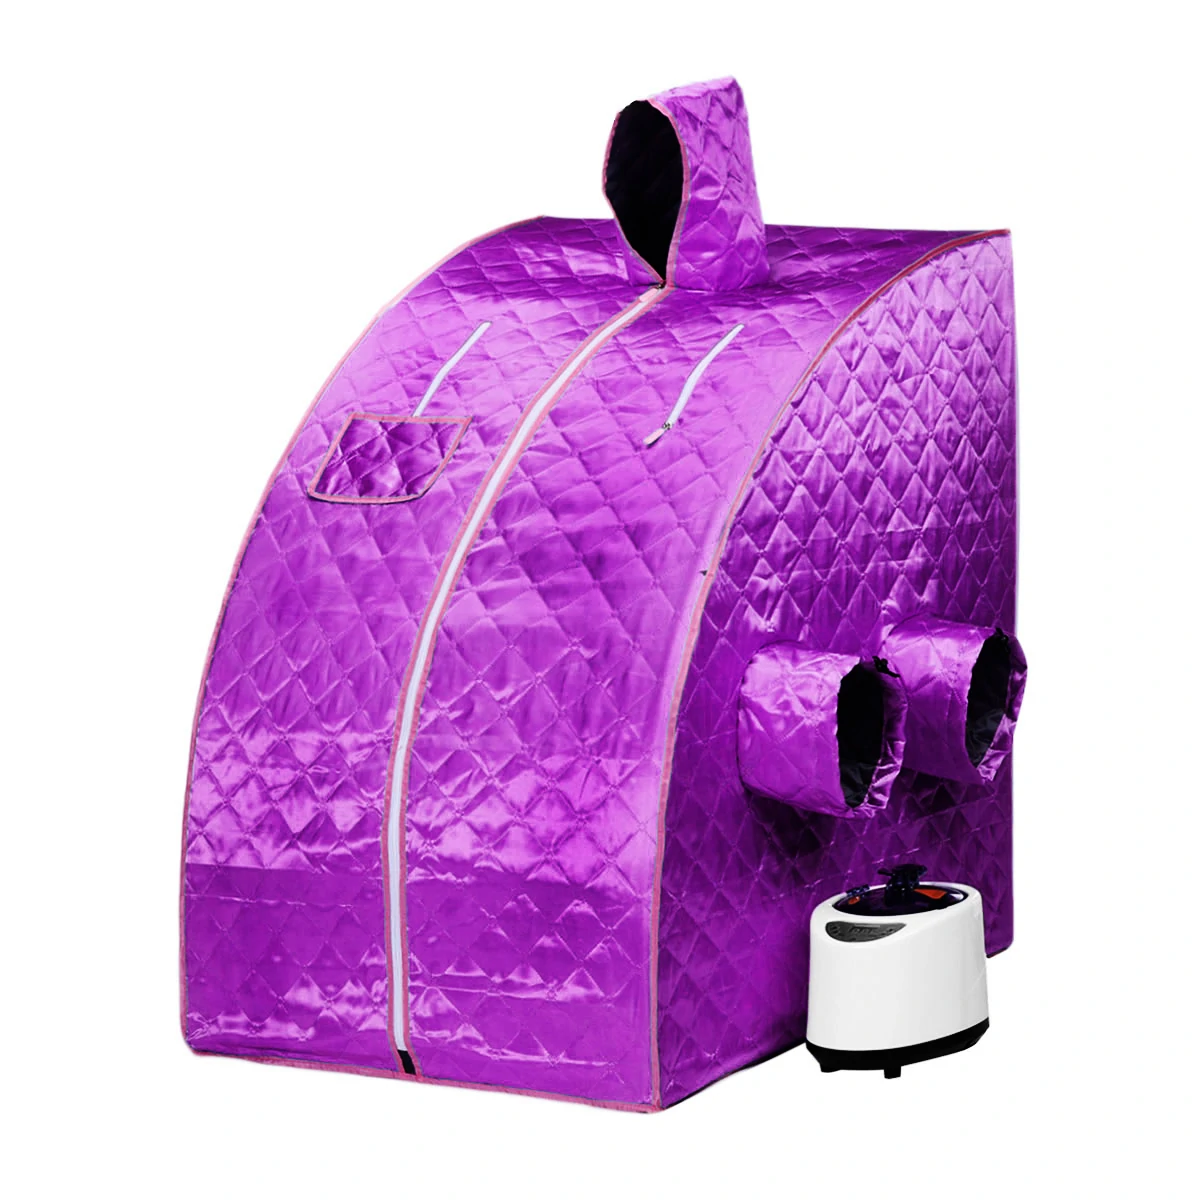 Find 2 2L 1000W Portable Foldable Steam Sauna Tent Home Spa Full Body Detox 2 Persons for Sale on Gipsybee.com